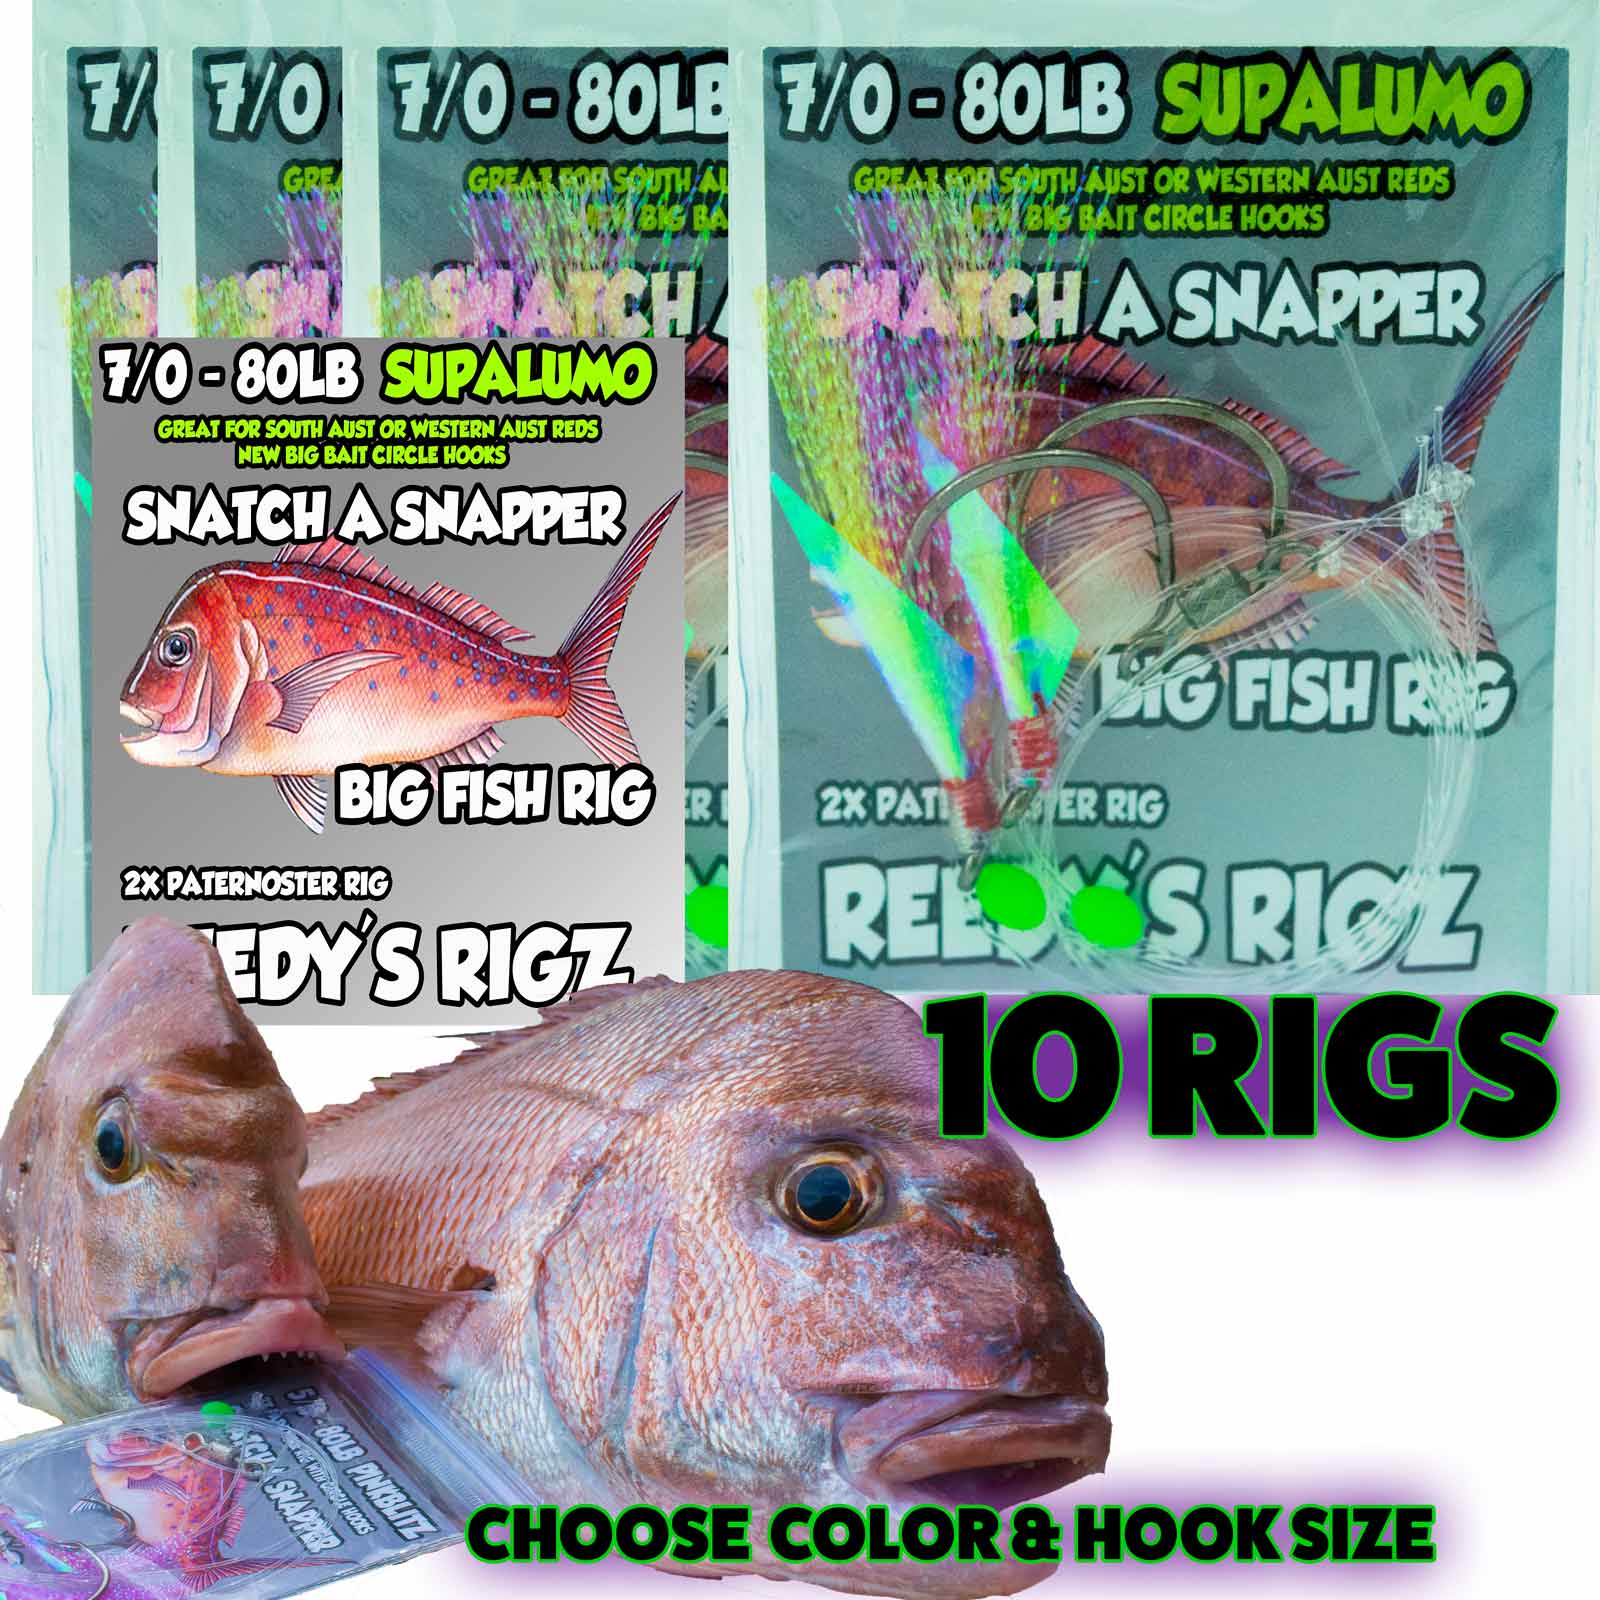 Snapper Snatchers Rig Fishing Rigs Tackle Online Shop Blogs & More  Snapper  snatcher Rig Fishing Rigs Online Shop Buy Now Save Huge Dollars On Black  Label Pre tied Flasher rigs Australian